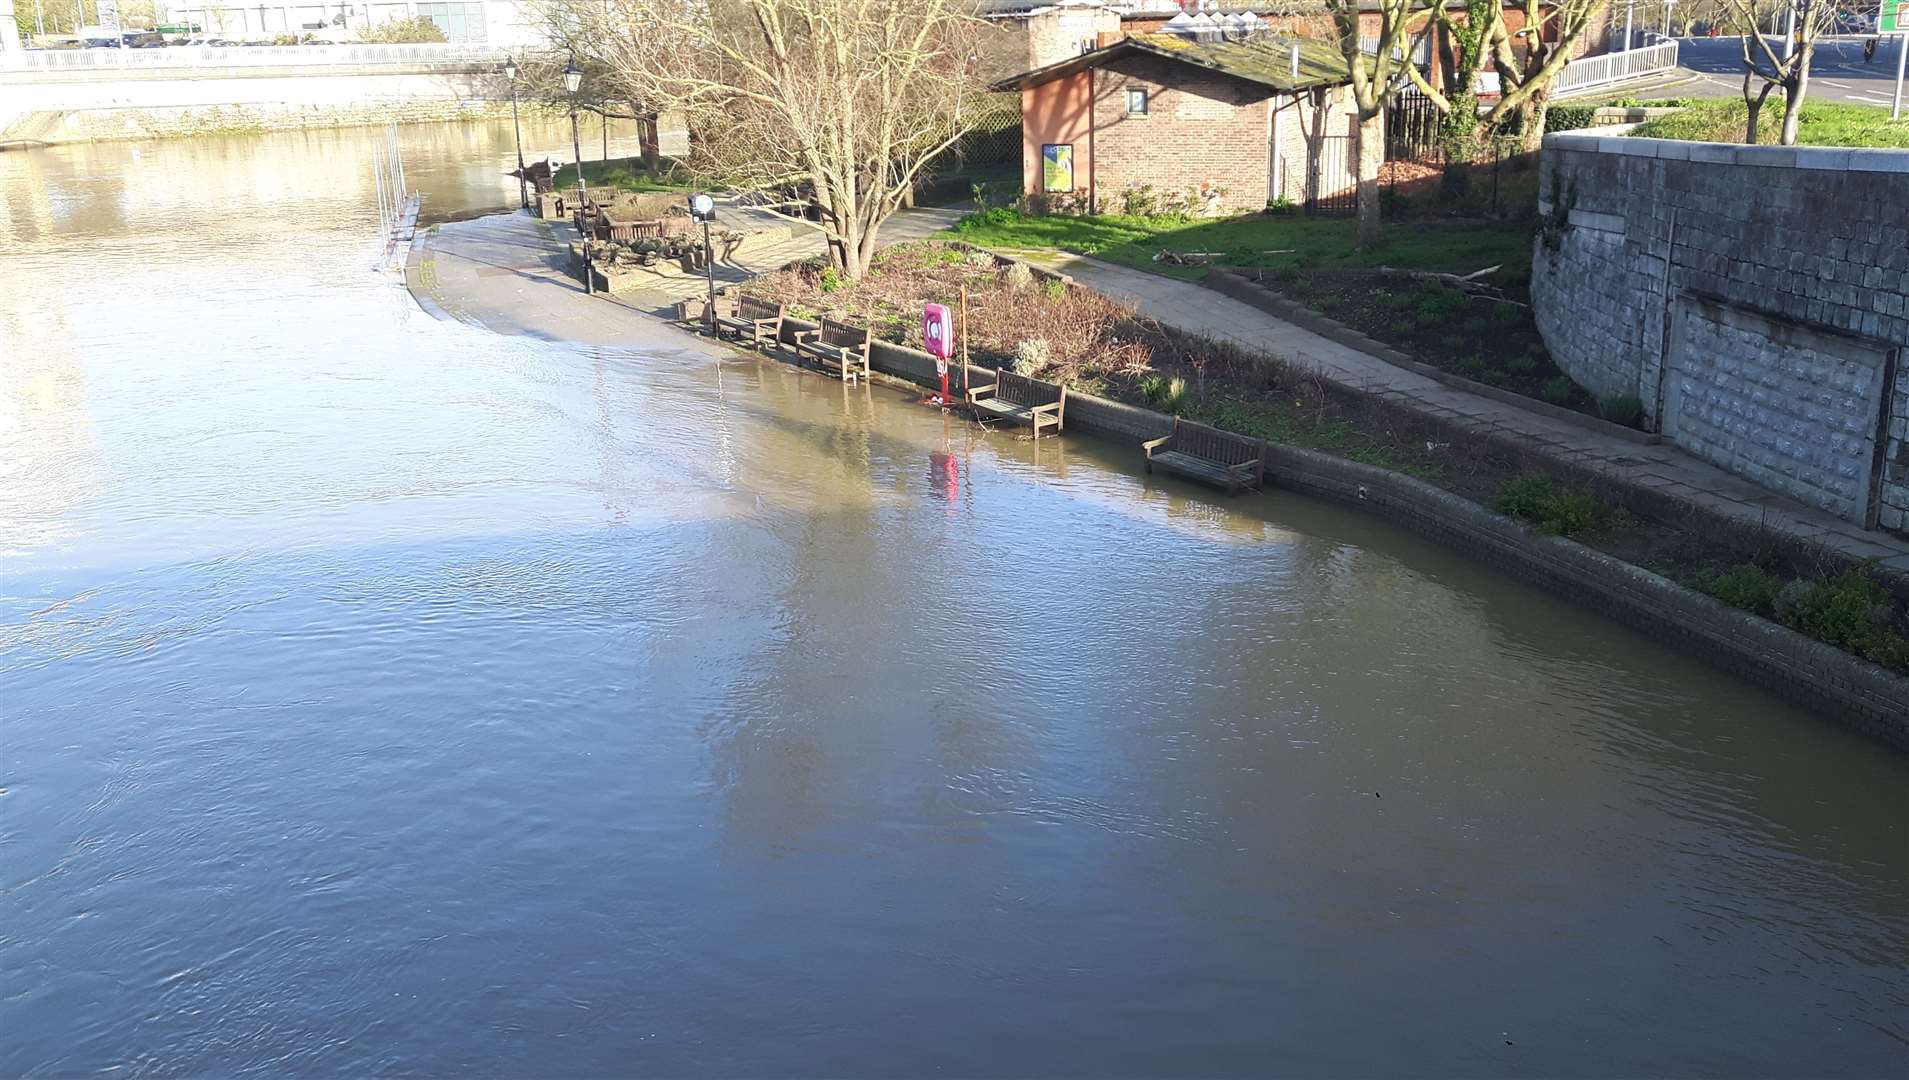 There is a flood warning for parts of the River Medway